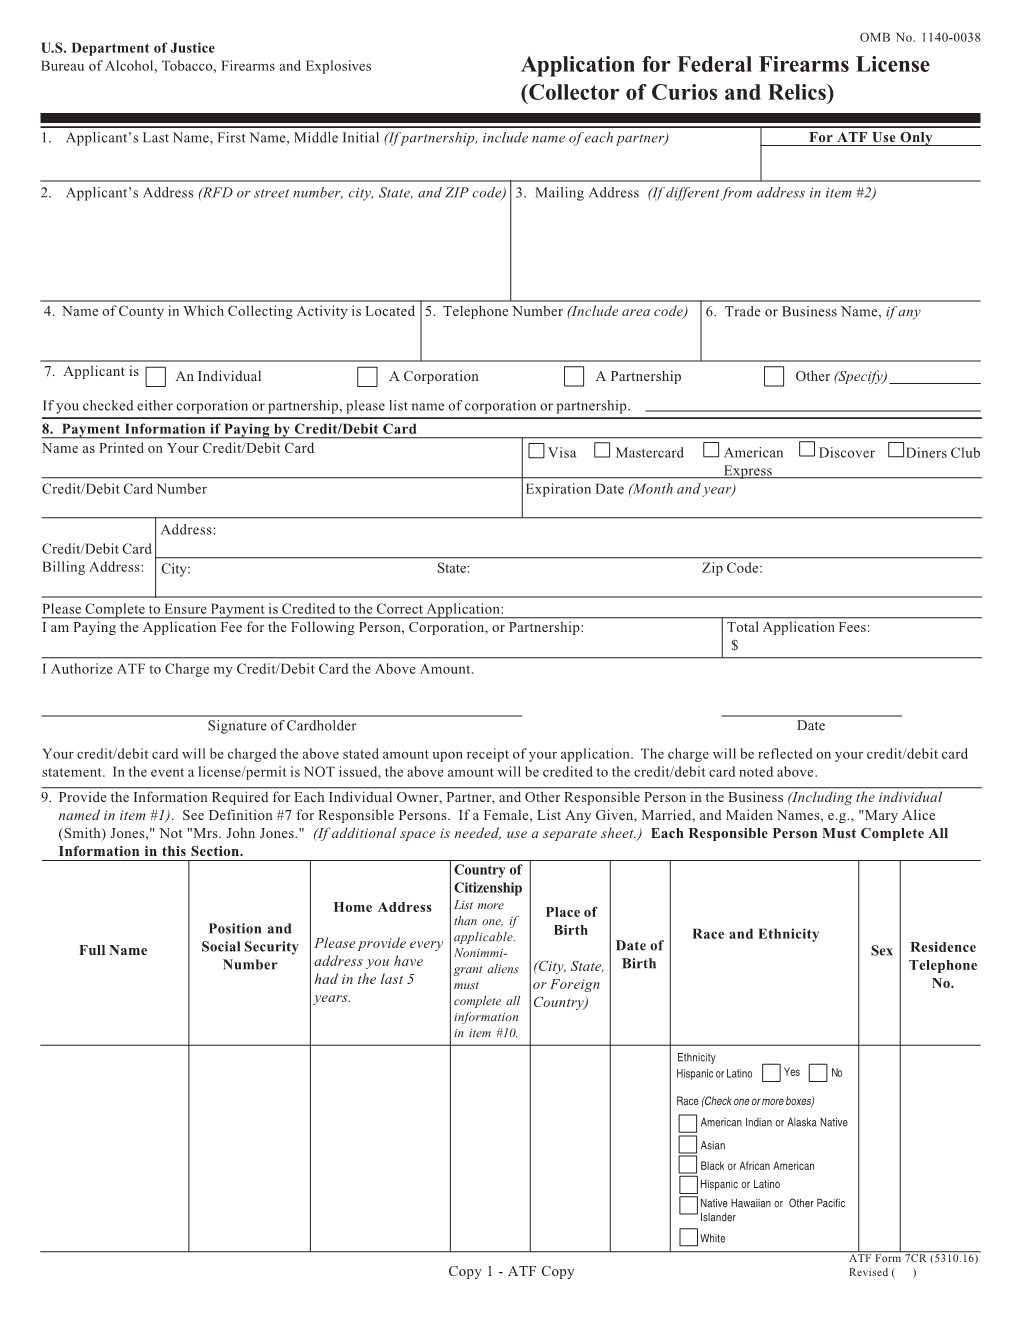 Application for Federal Firearms License (Collector of Curios and Relics)